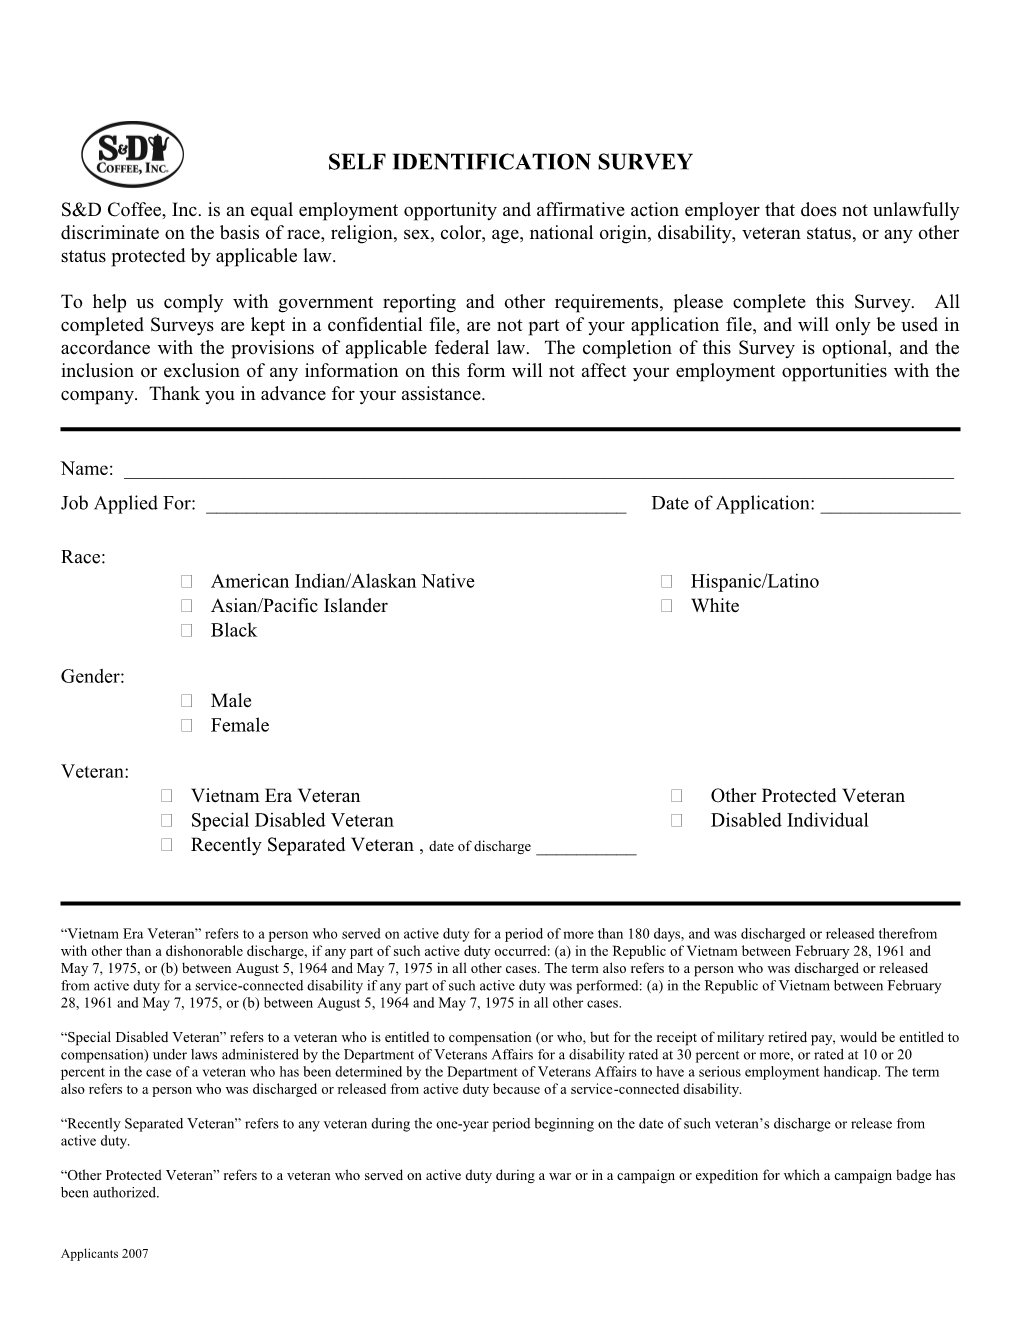 Voluntary Supplement to Employment Application